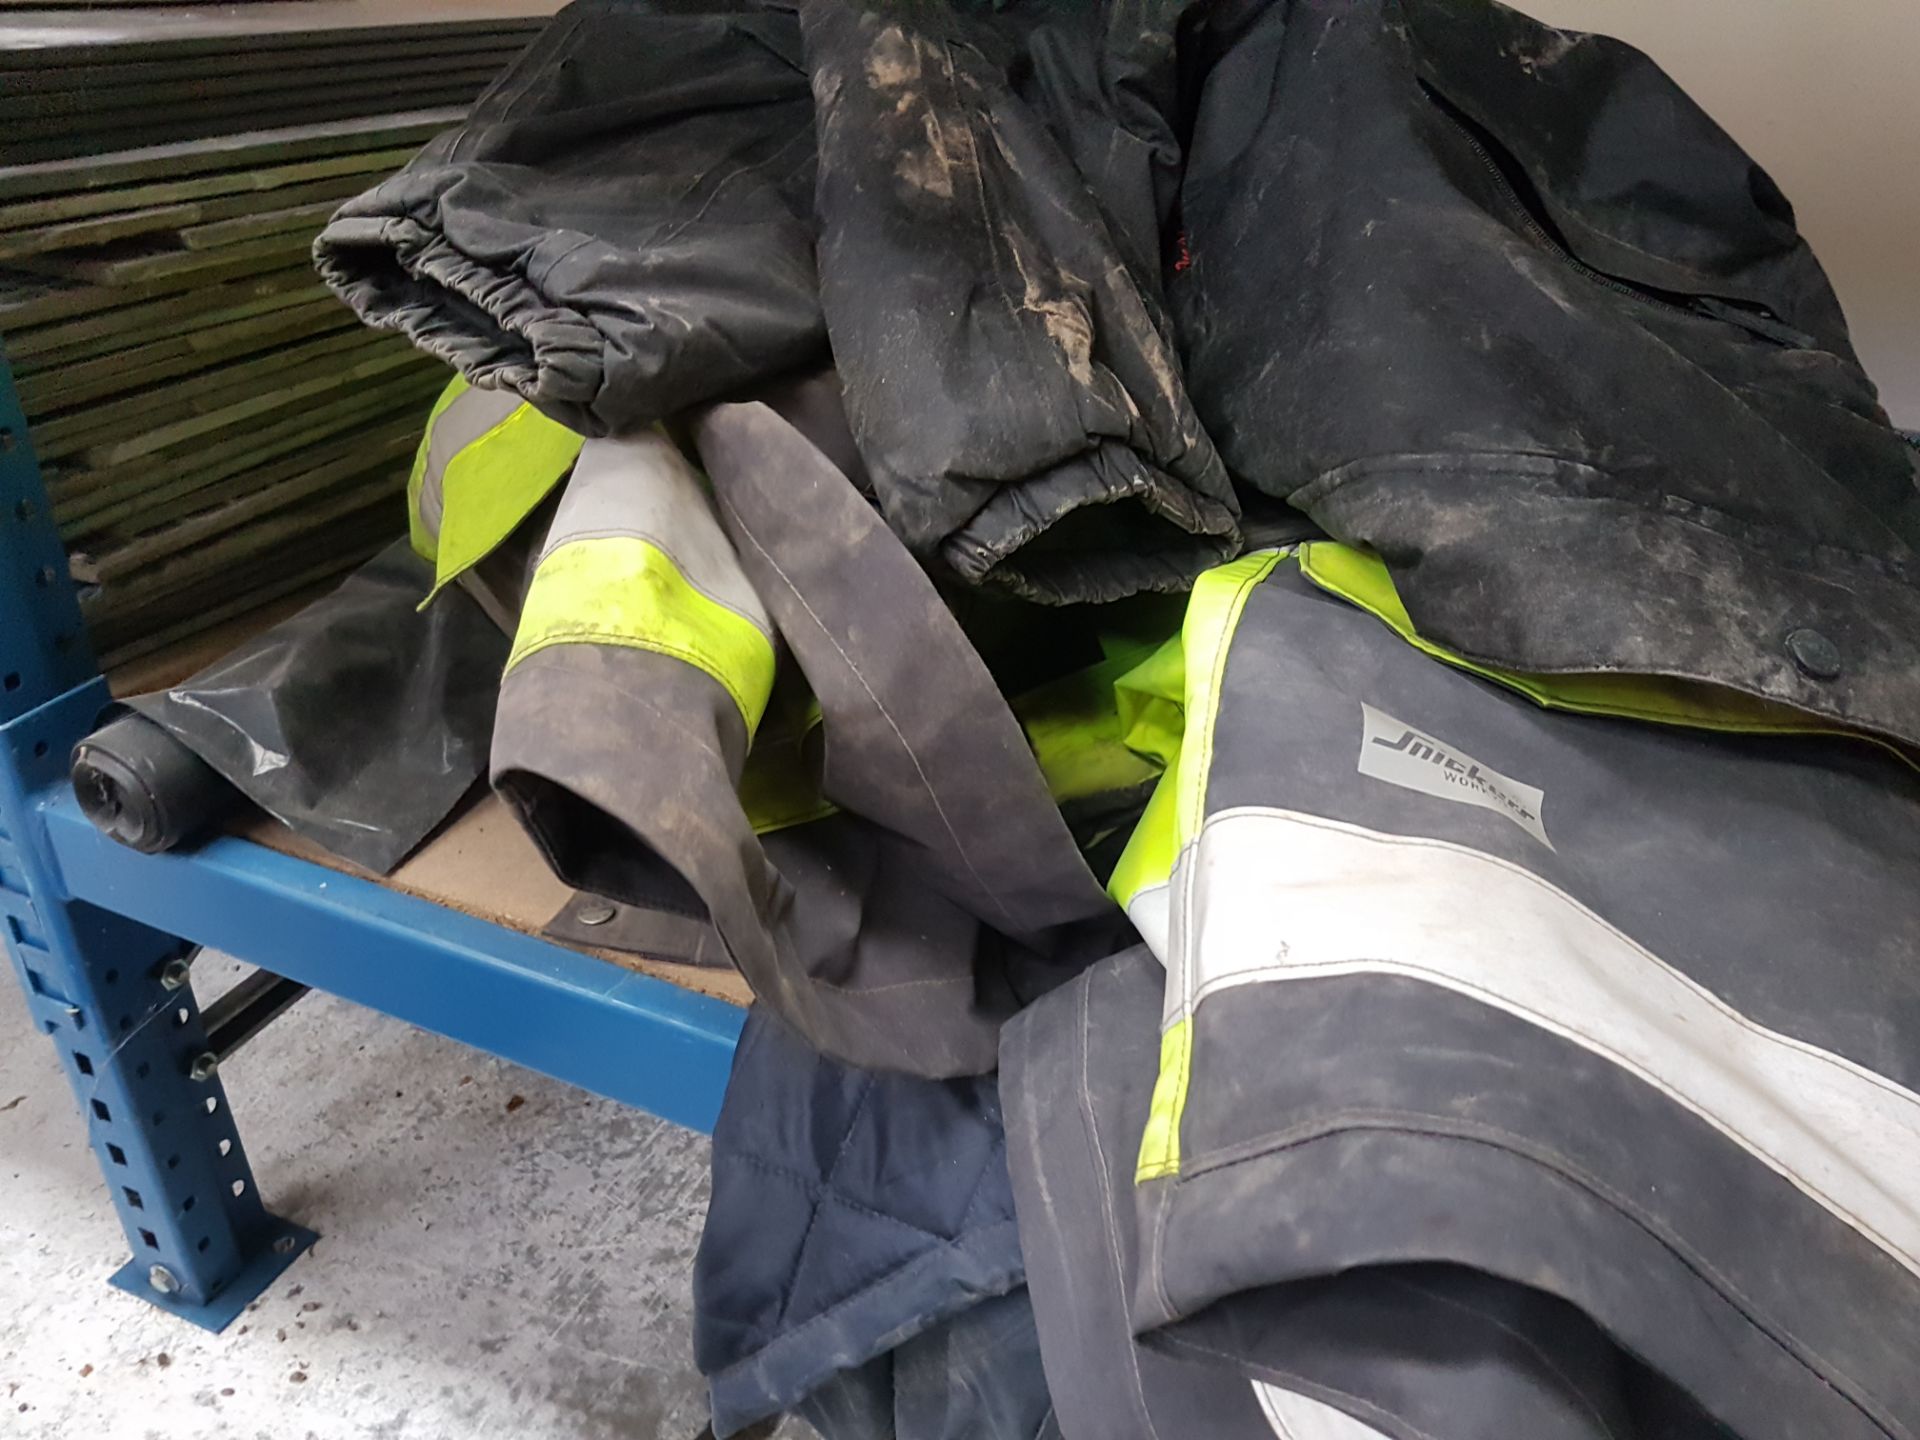 1 x Assorted Collection of Workwear - Includes Hi Viz Coats, Workboots, Ear Protectors etc - CL303 - - Image 4 of 4